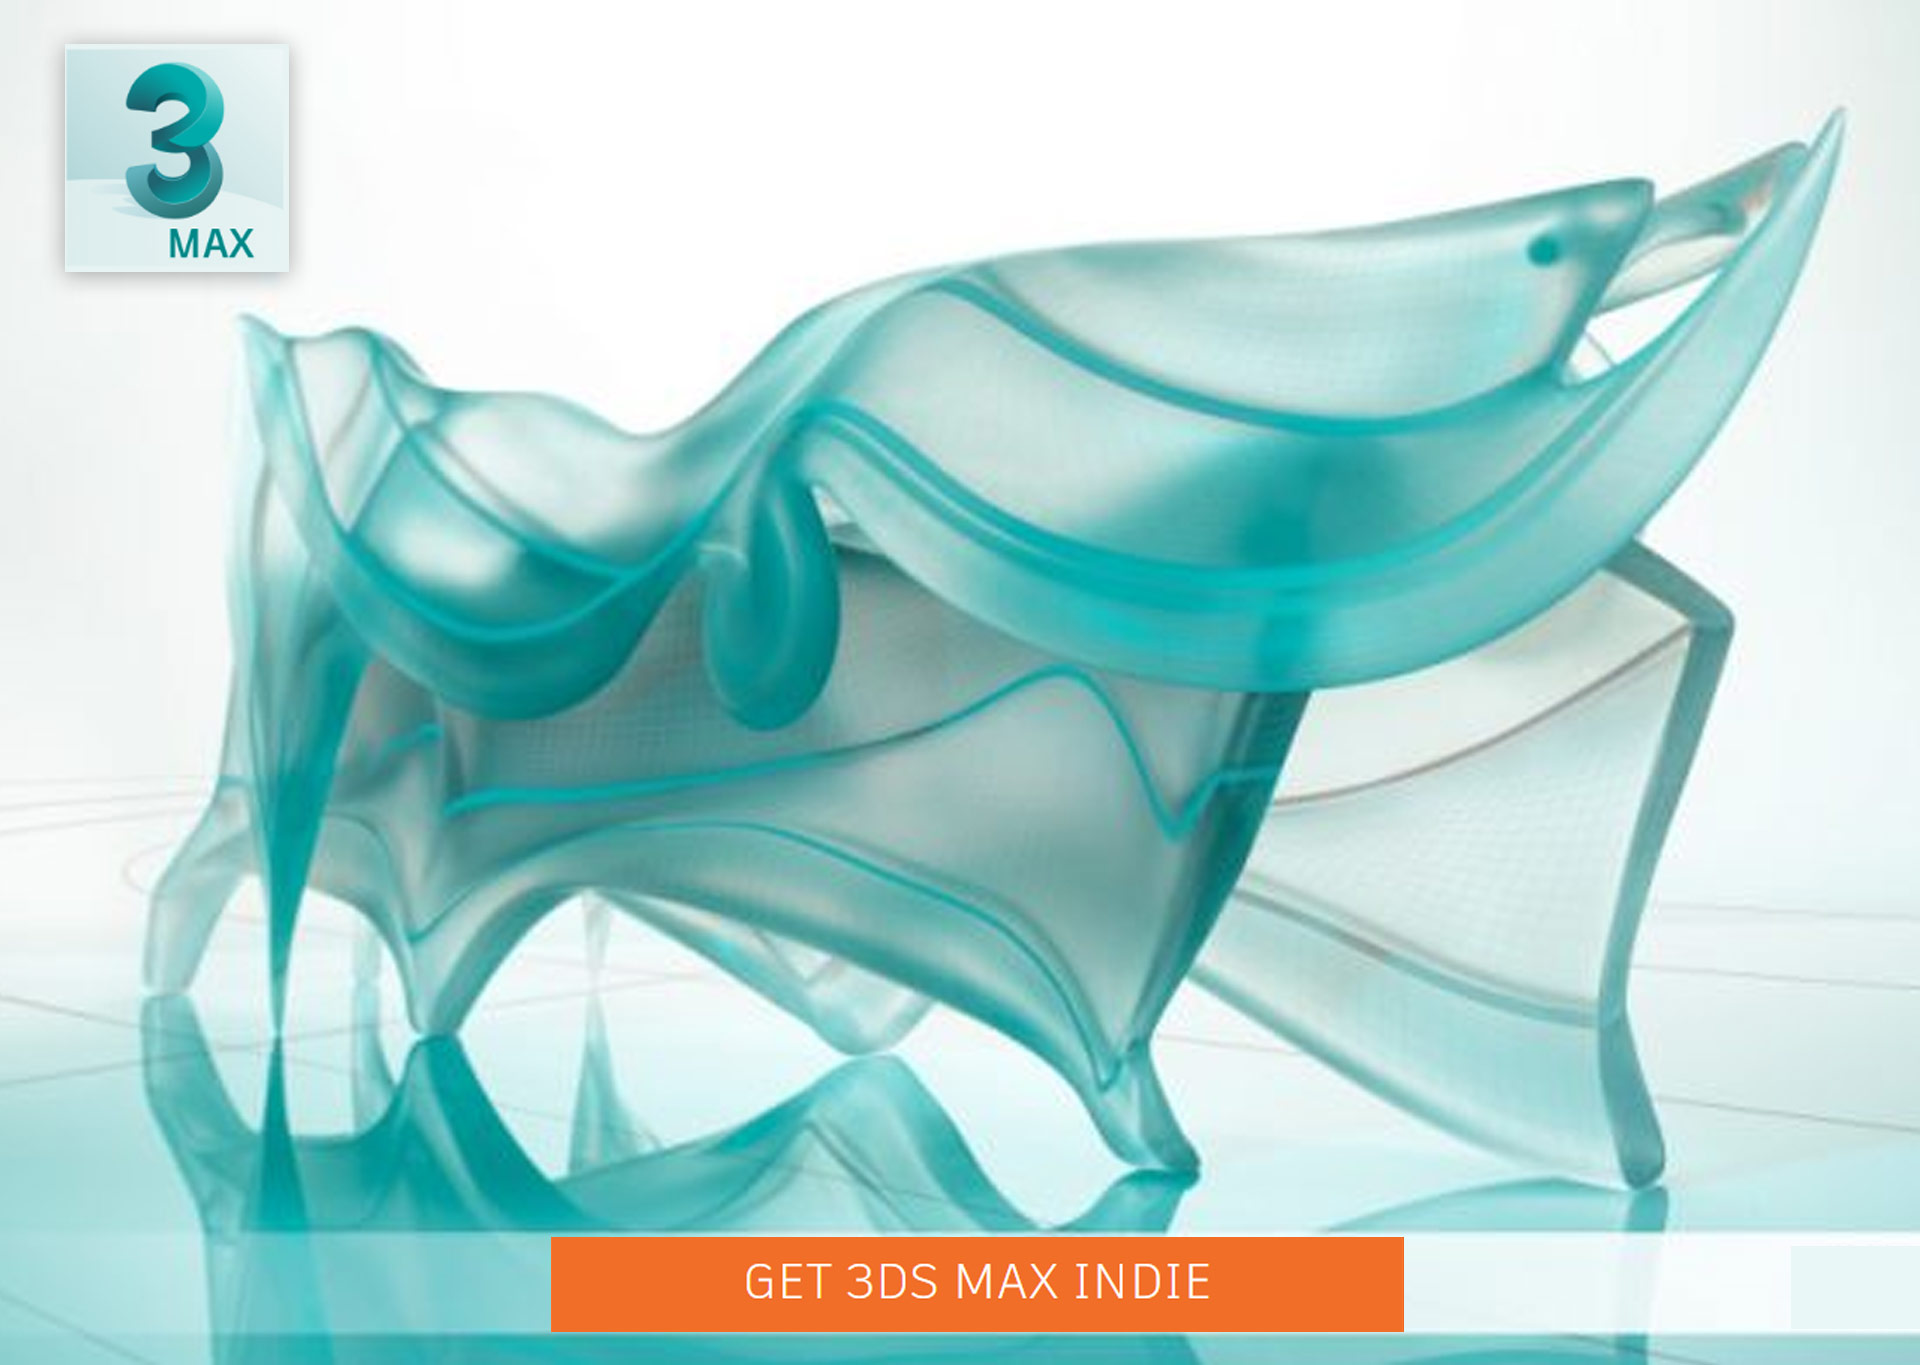 Announces "Indie" License for 3DS & Maya |